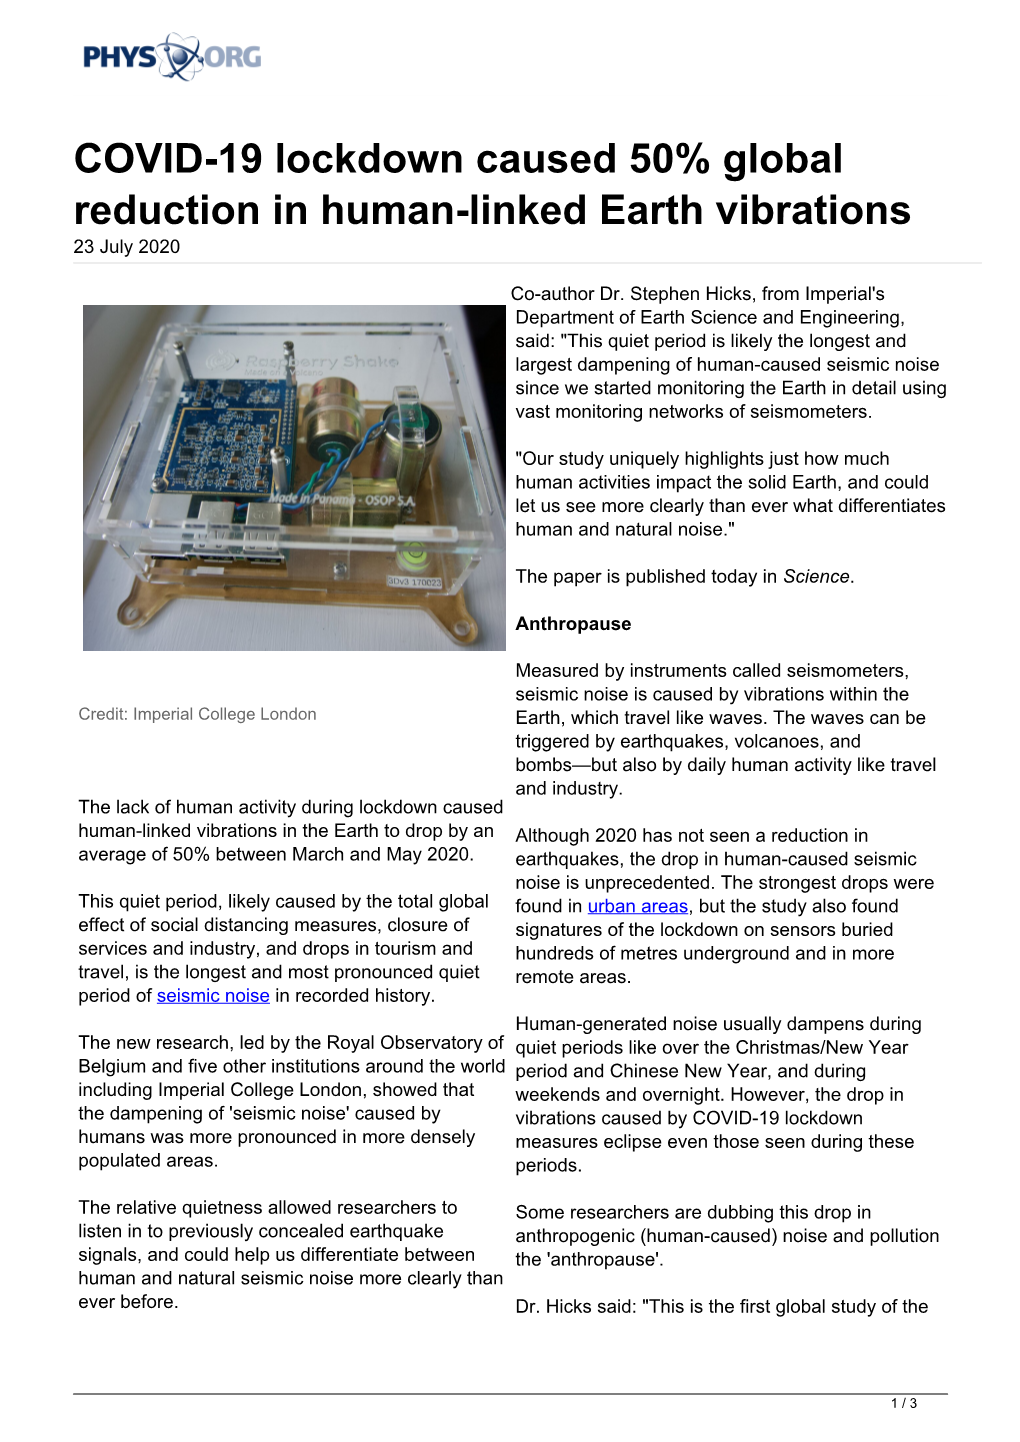 COVID-19 Lockdown Caused 50% Global Reduction in Human-Linked Earth Vibrations 23 July 2020